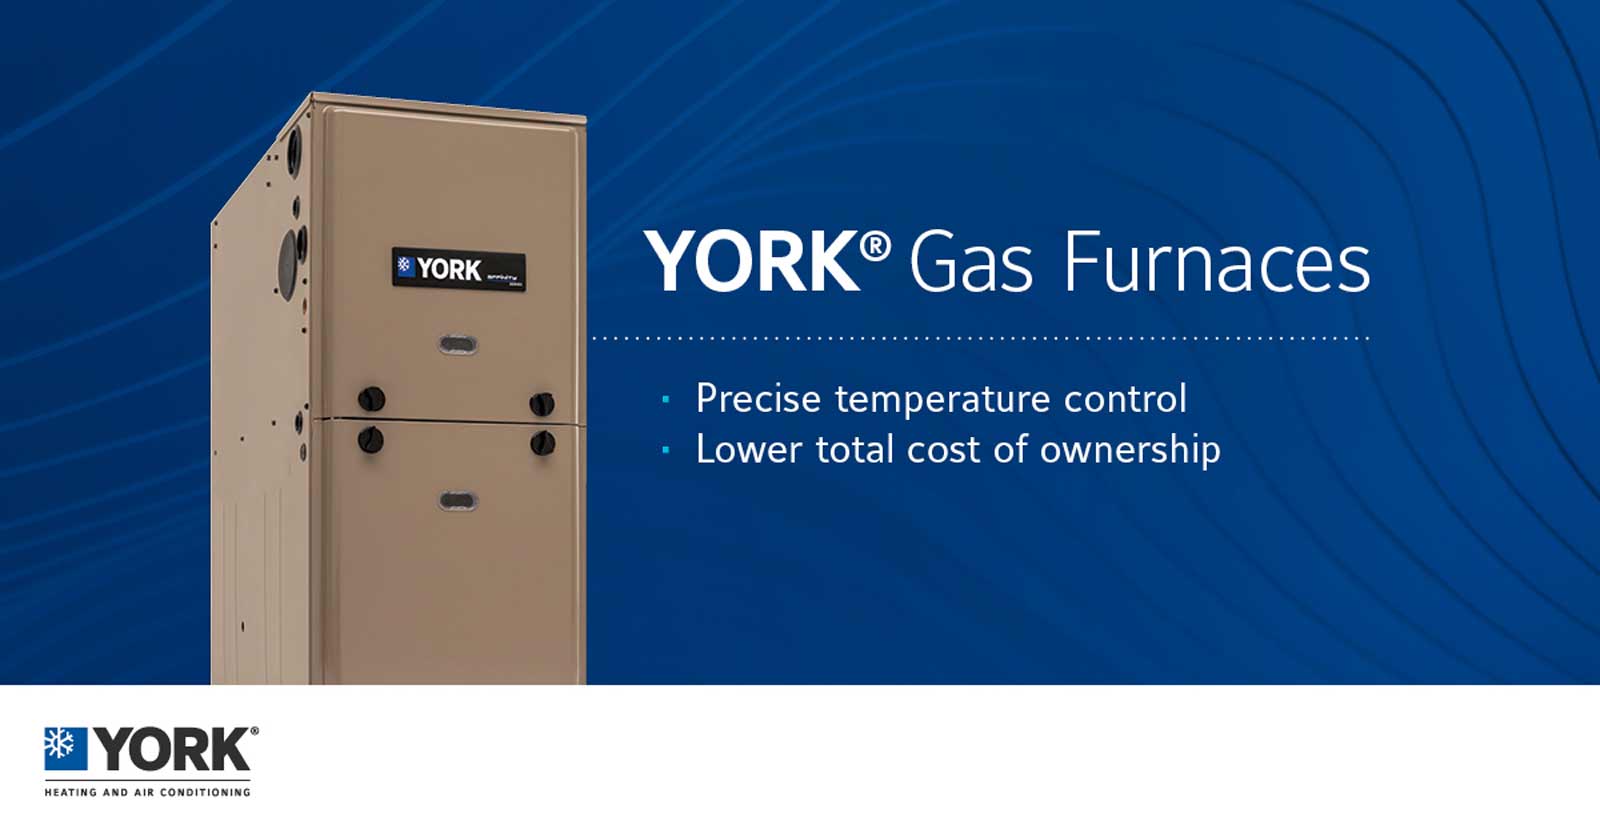 YORK HVAC protects Consumers with good housekeeping seal of approval and extra guarantees